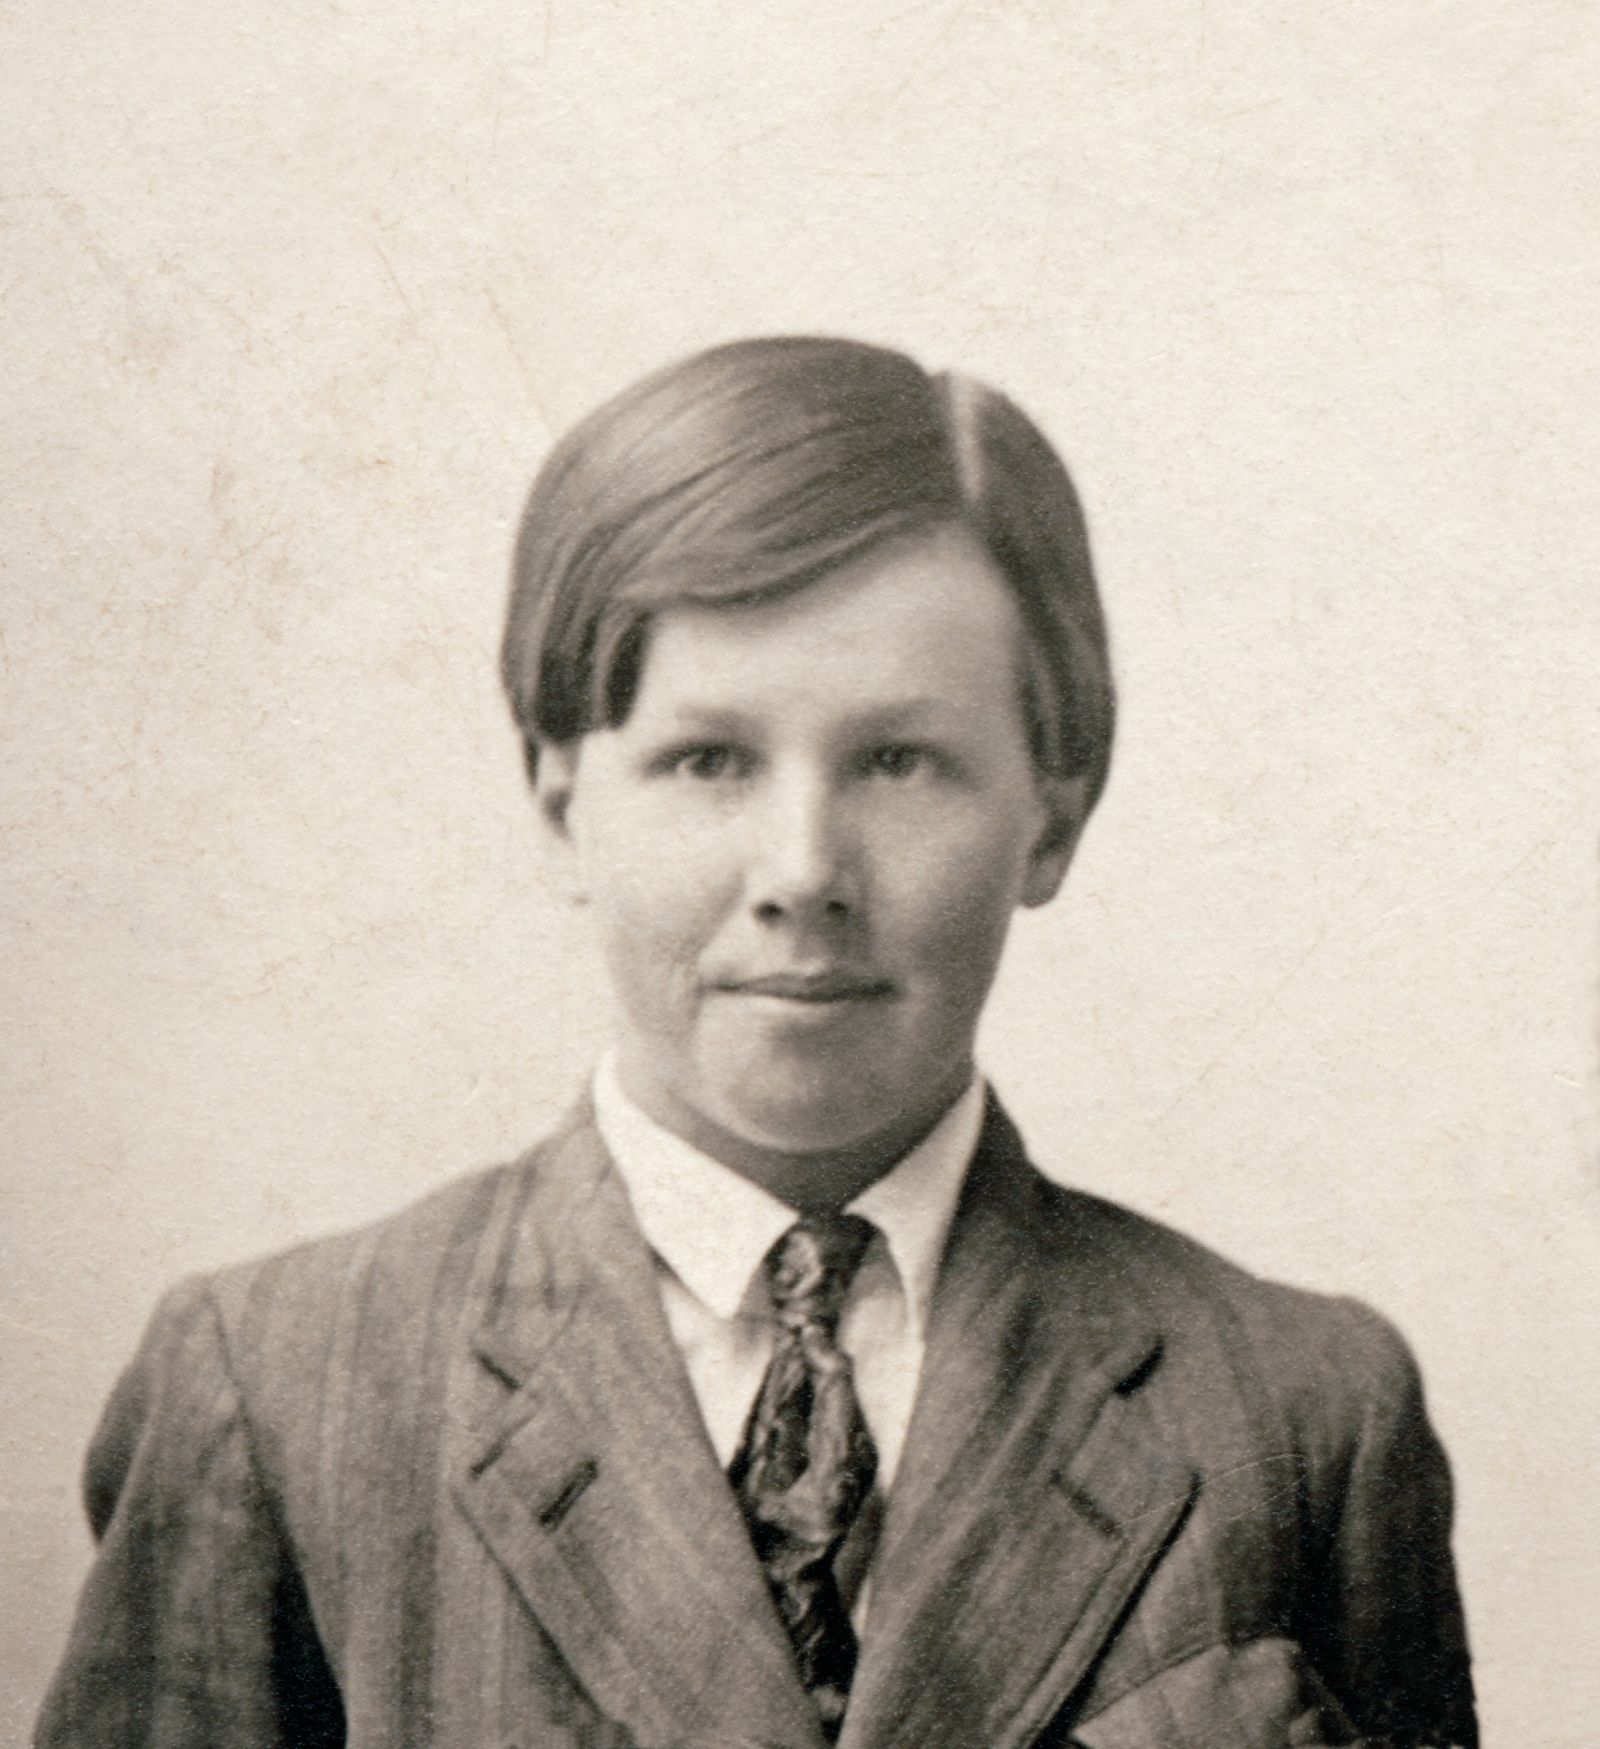 President Benson as a young man with his hair parted, wearing a suit and tie.